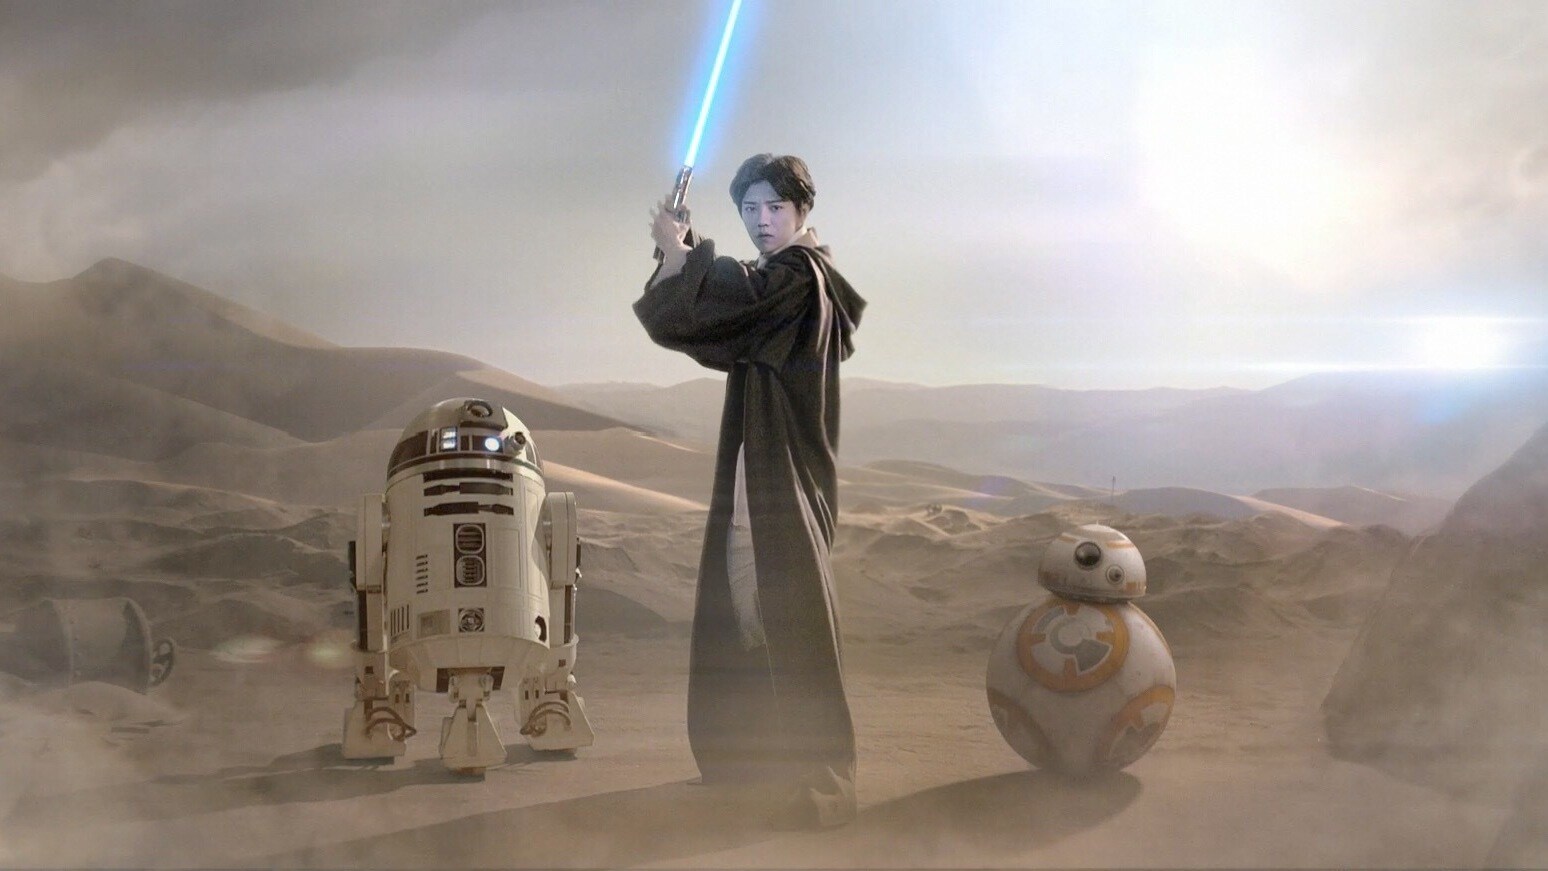 LuHan Becomes a Jedi in China's Star Wars: The Force Awakens Promo